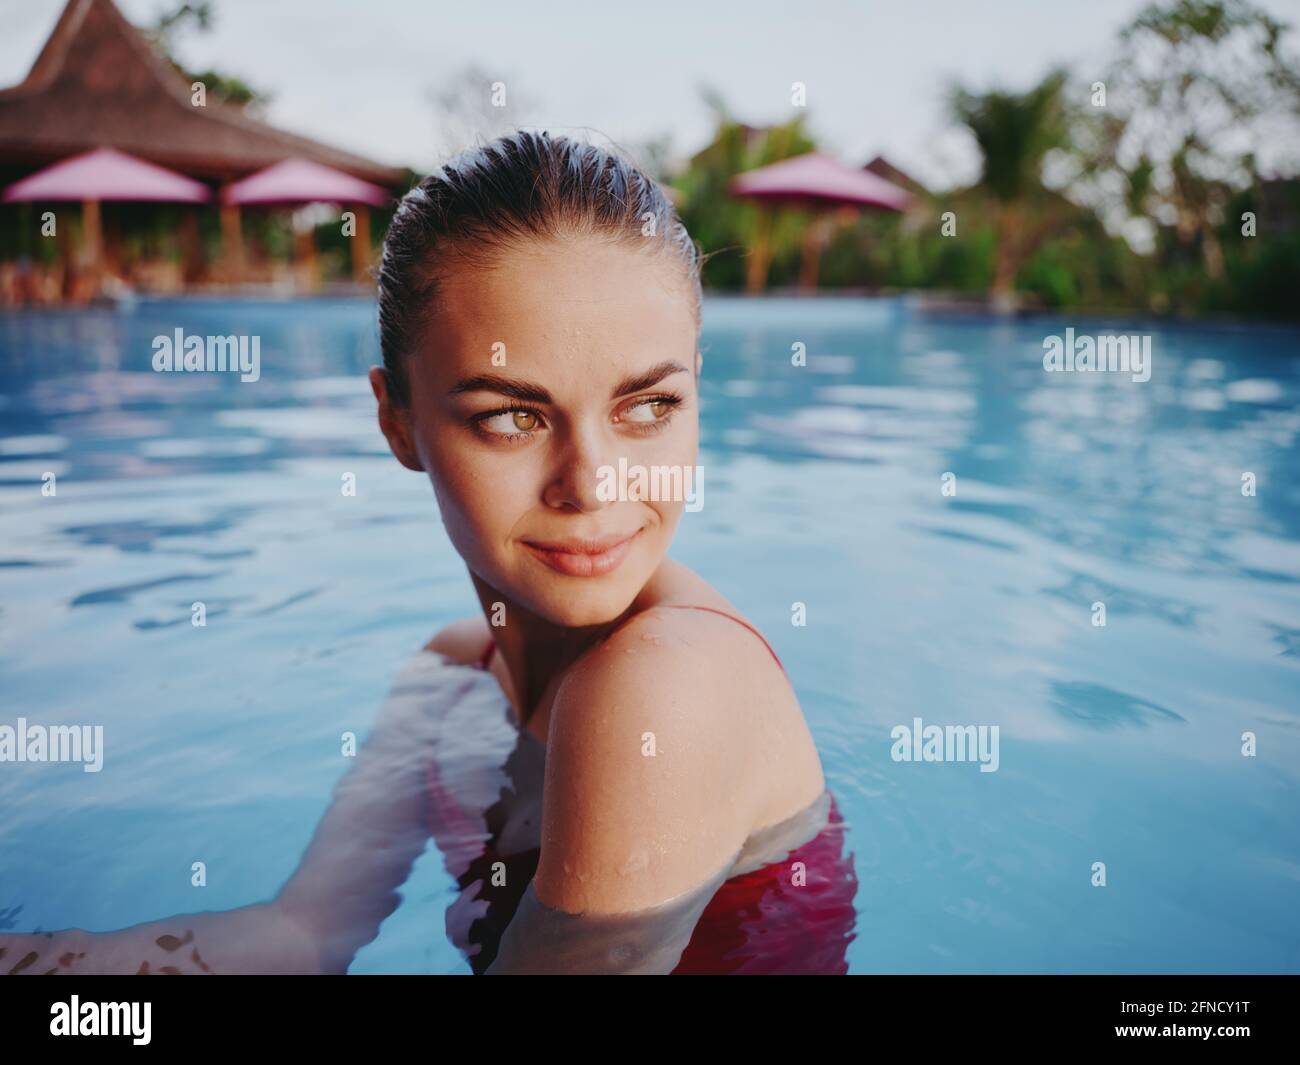 portrait of woman with wet hair in pool cropped view Stock Photo